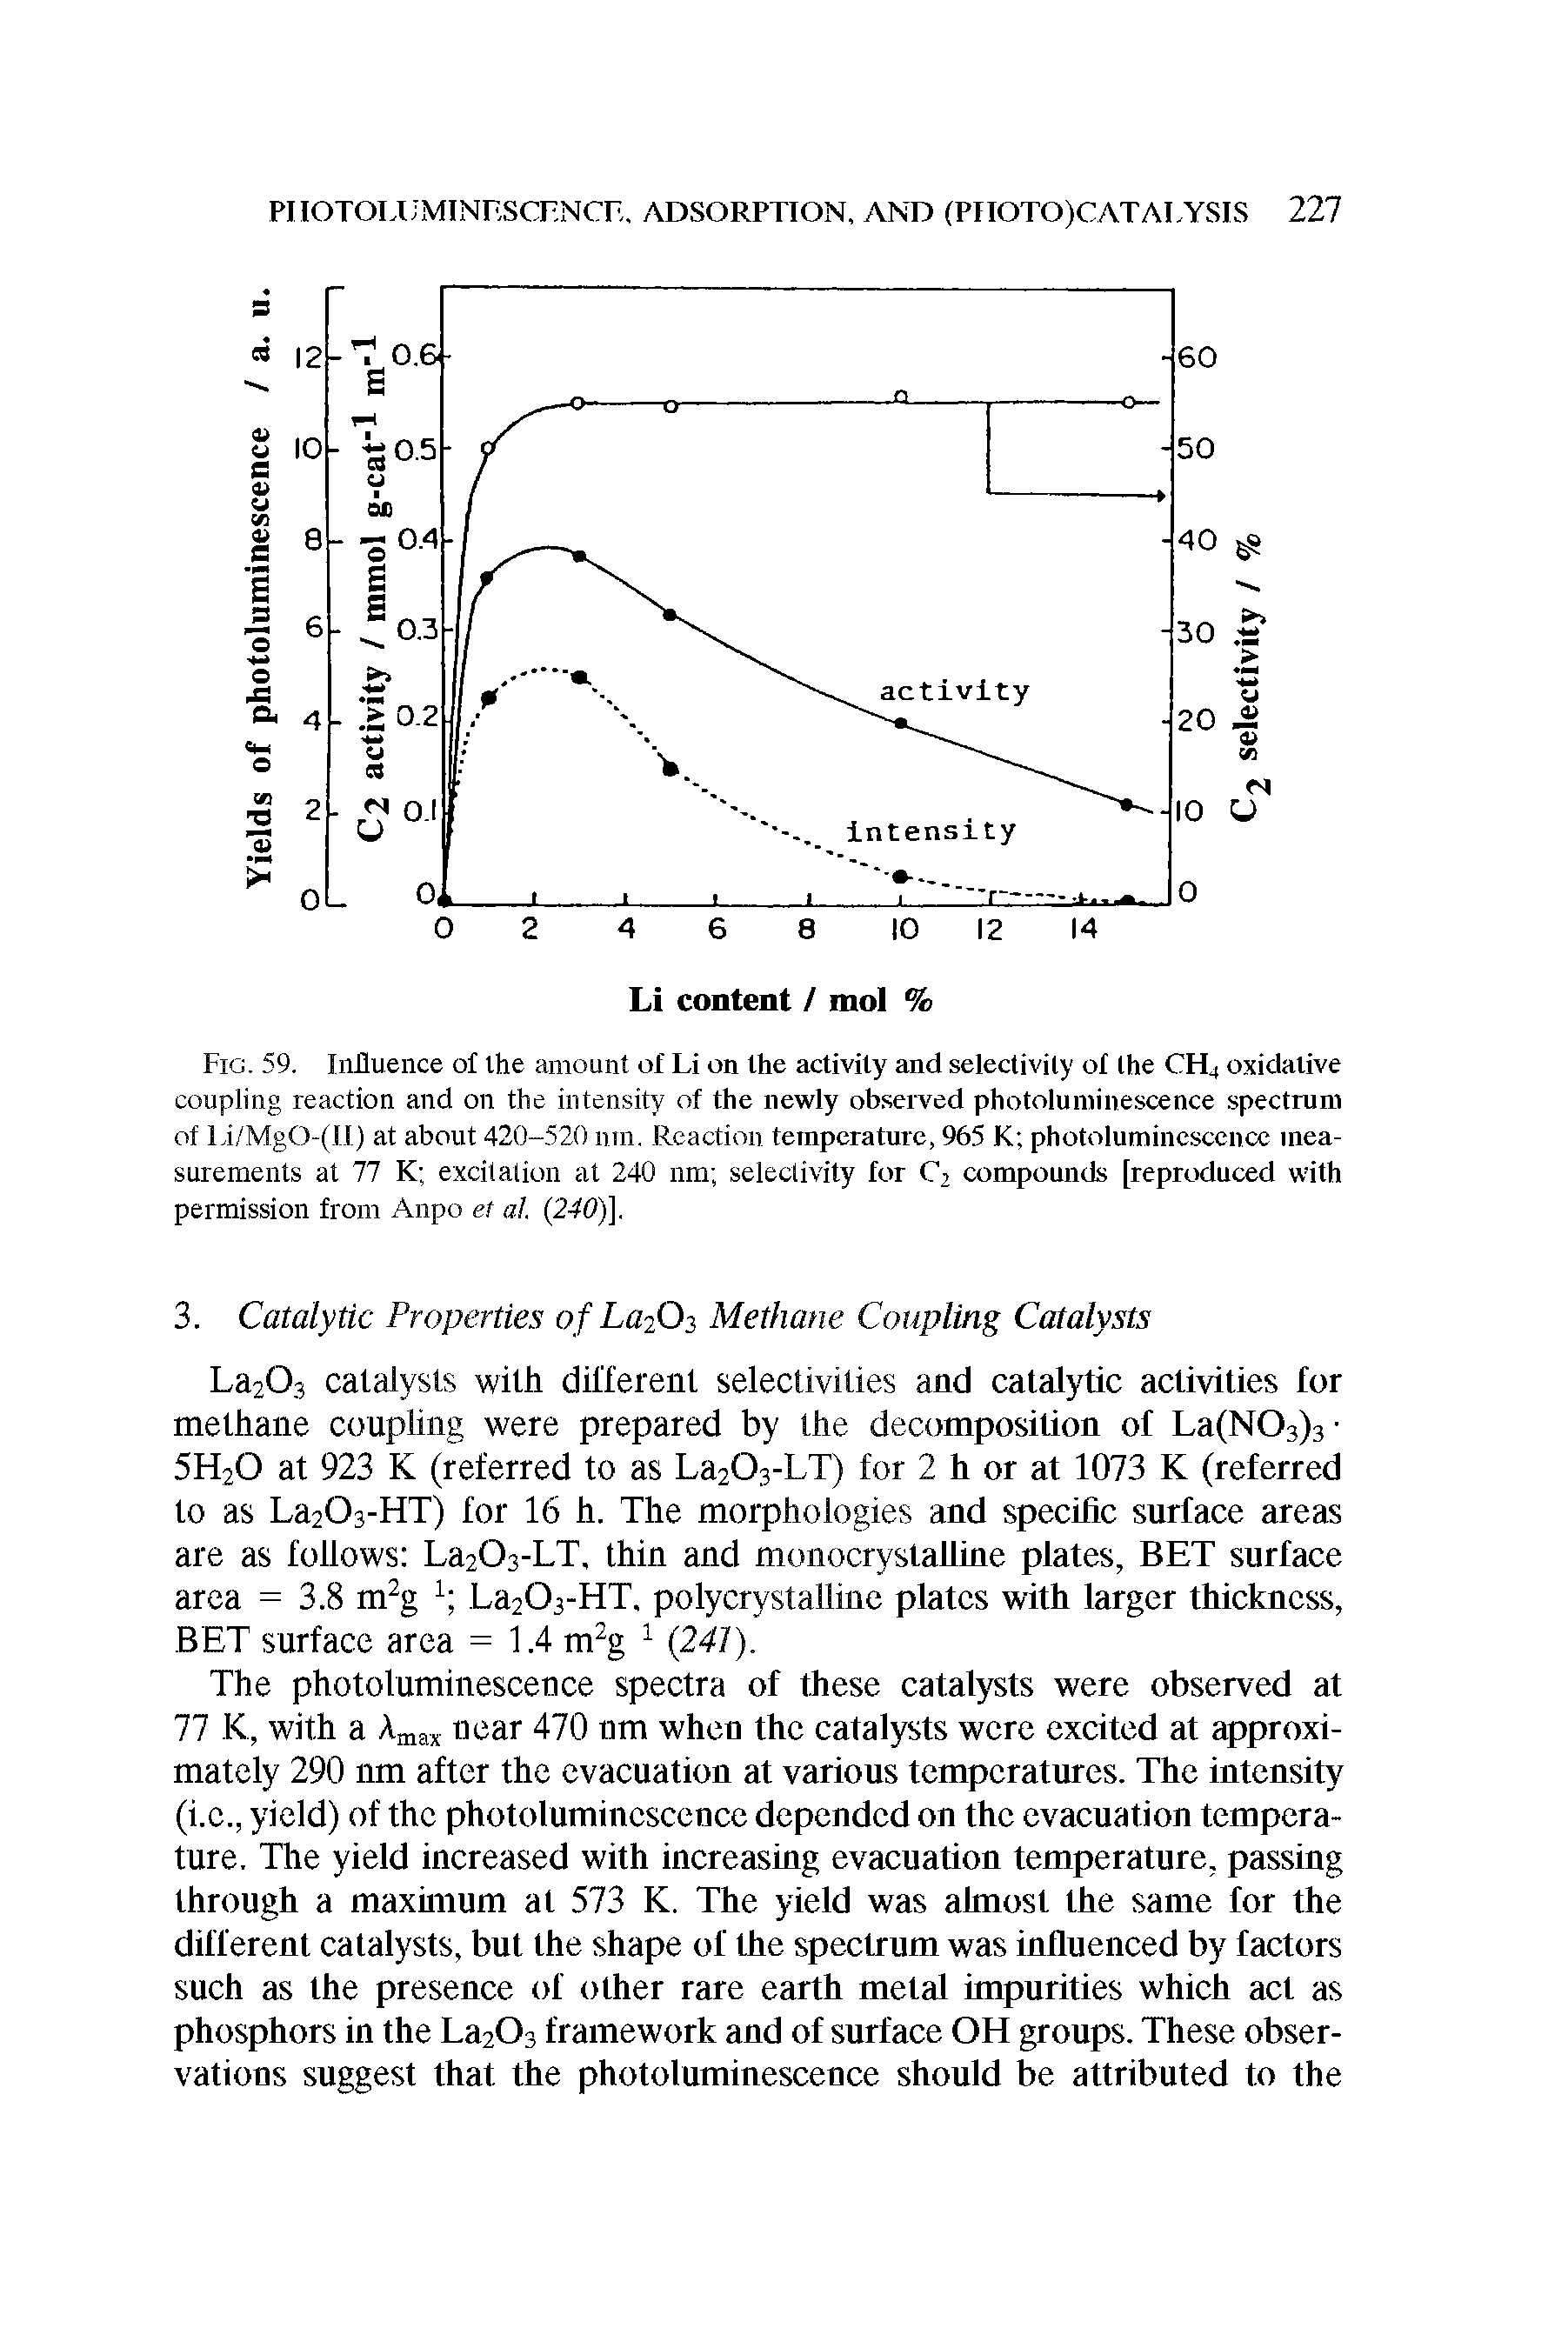 Fig. 59. Influence of Ihe amount of Li on the activity and selectivity ol the CH4 oxidative coupling reaction and on the intensity of the newly observed photoluininescence spectrum of Li/MgO-(II) at about 420-520 nin. Reaction temperature, 965 K photolumincsccncc measurements at 77 K excitation at 240 nm selectivity for C2 compounds [reproduced with permission from Anpo et al. (240)].